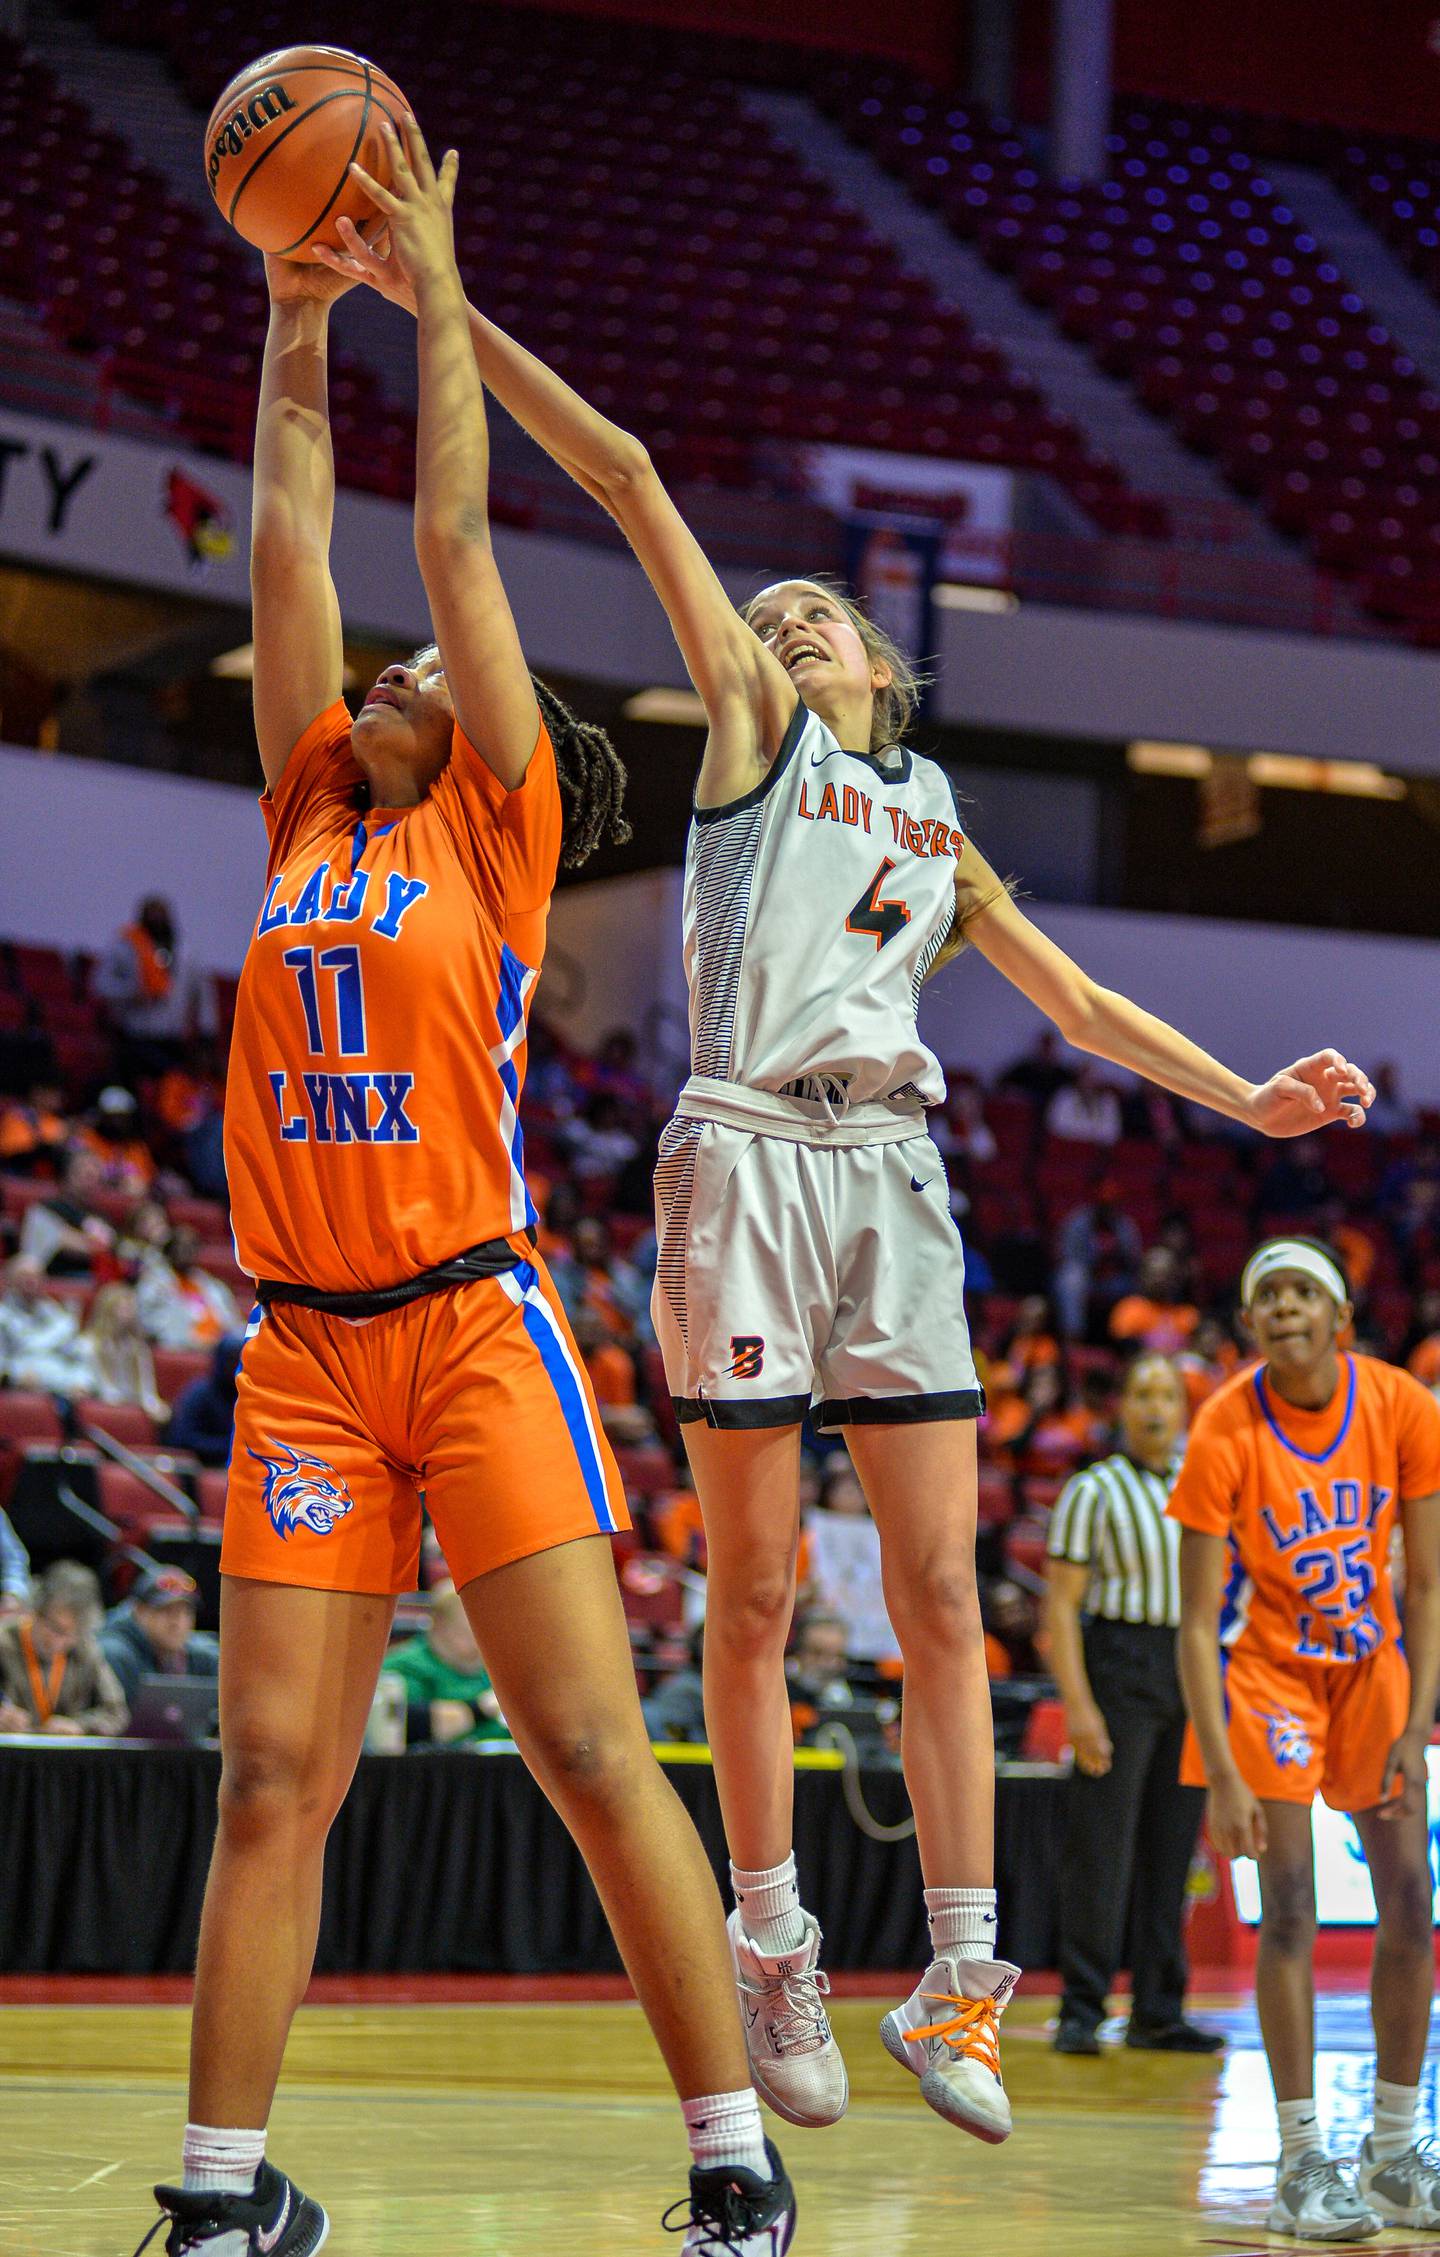 Byron's Macy Groharing (4) blocks a shot by Chicago Butler's Xyanna Walton (11) at the 2A state semifinal game March 2.